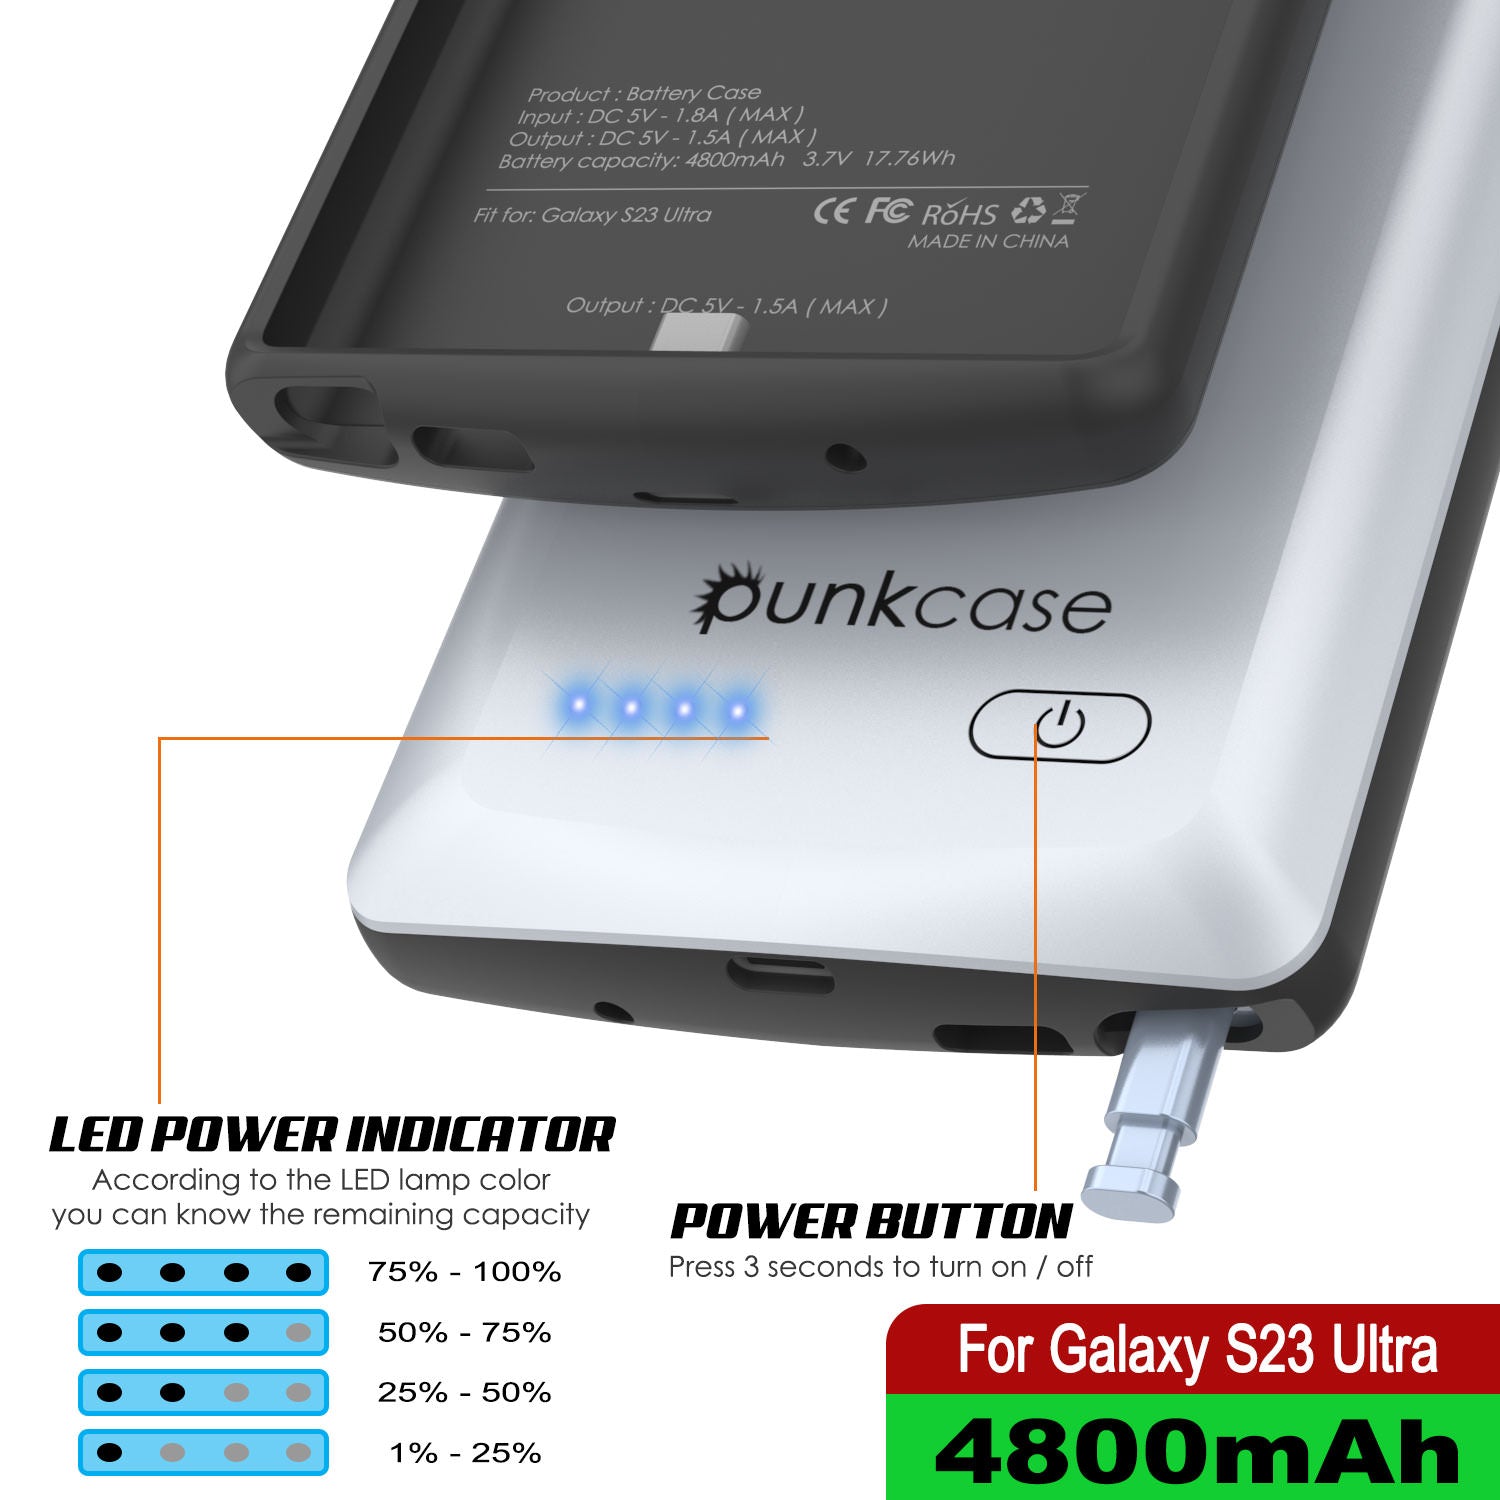 PunkJuice S24+ Plus Battery Case White - Portable Charging Power Juice Bank with 5000mAh